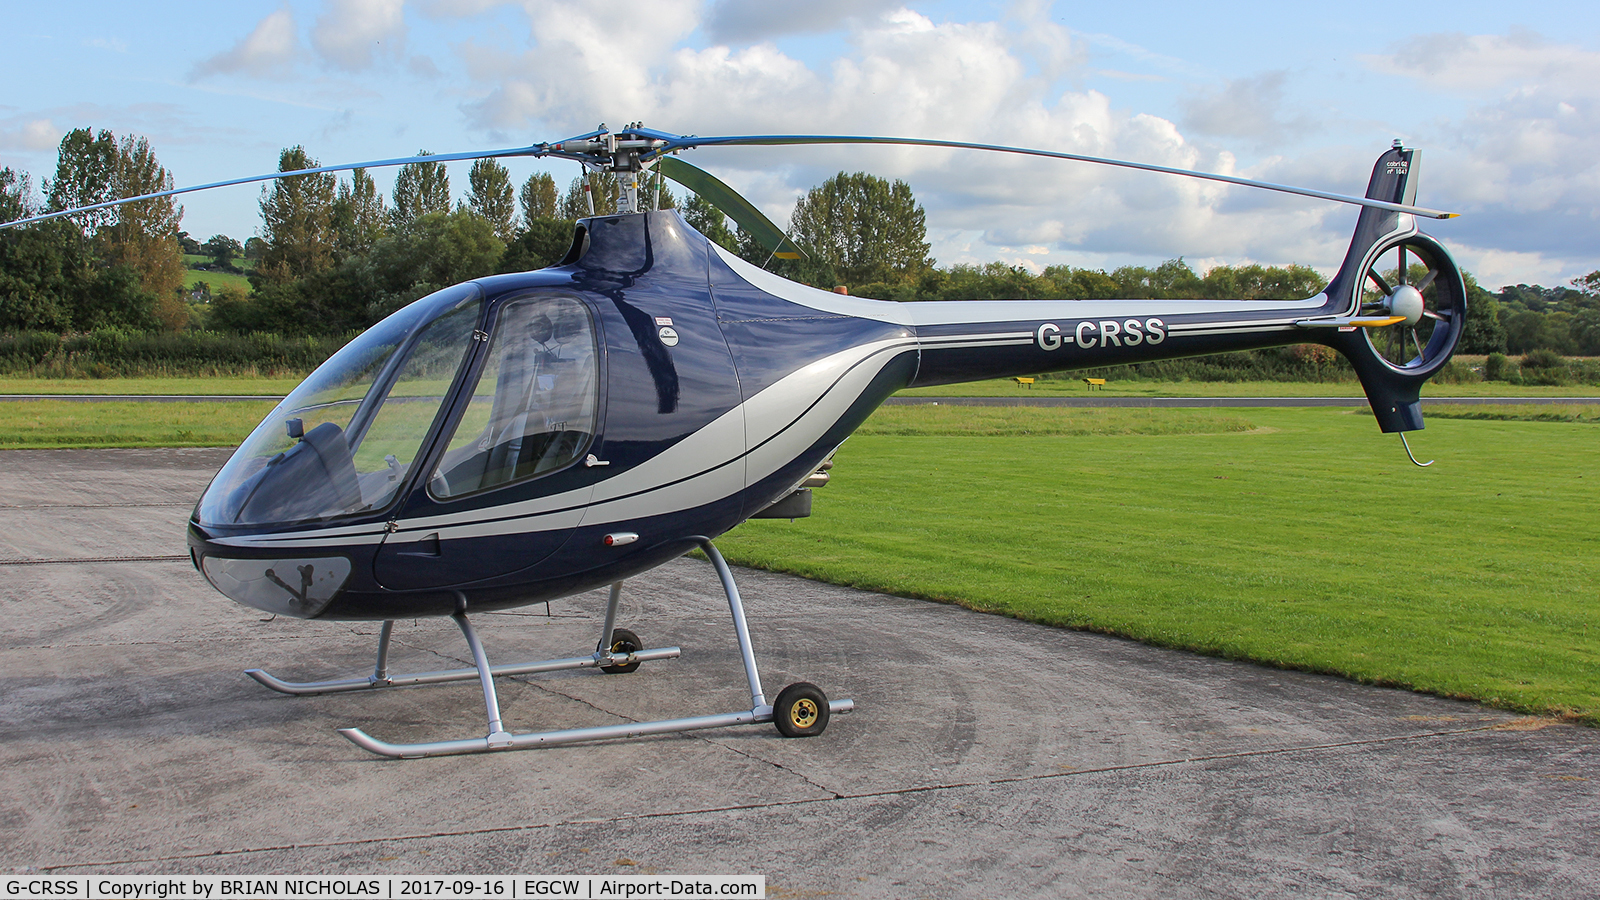 G-CRSS, 2013 Guimbal Cabri G2 C/N 1047, Stop over.